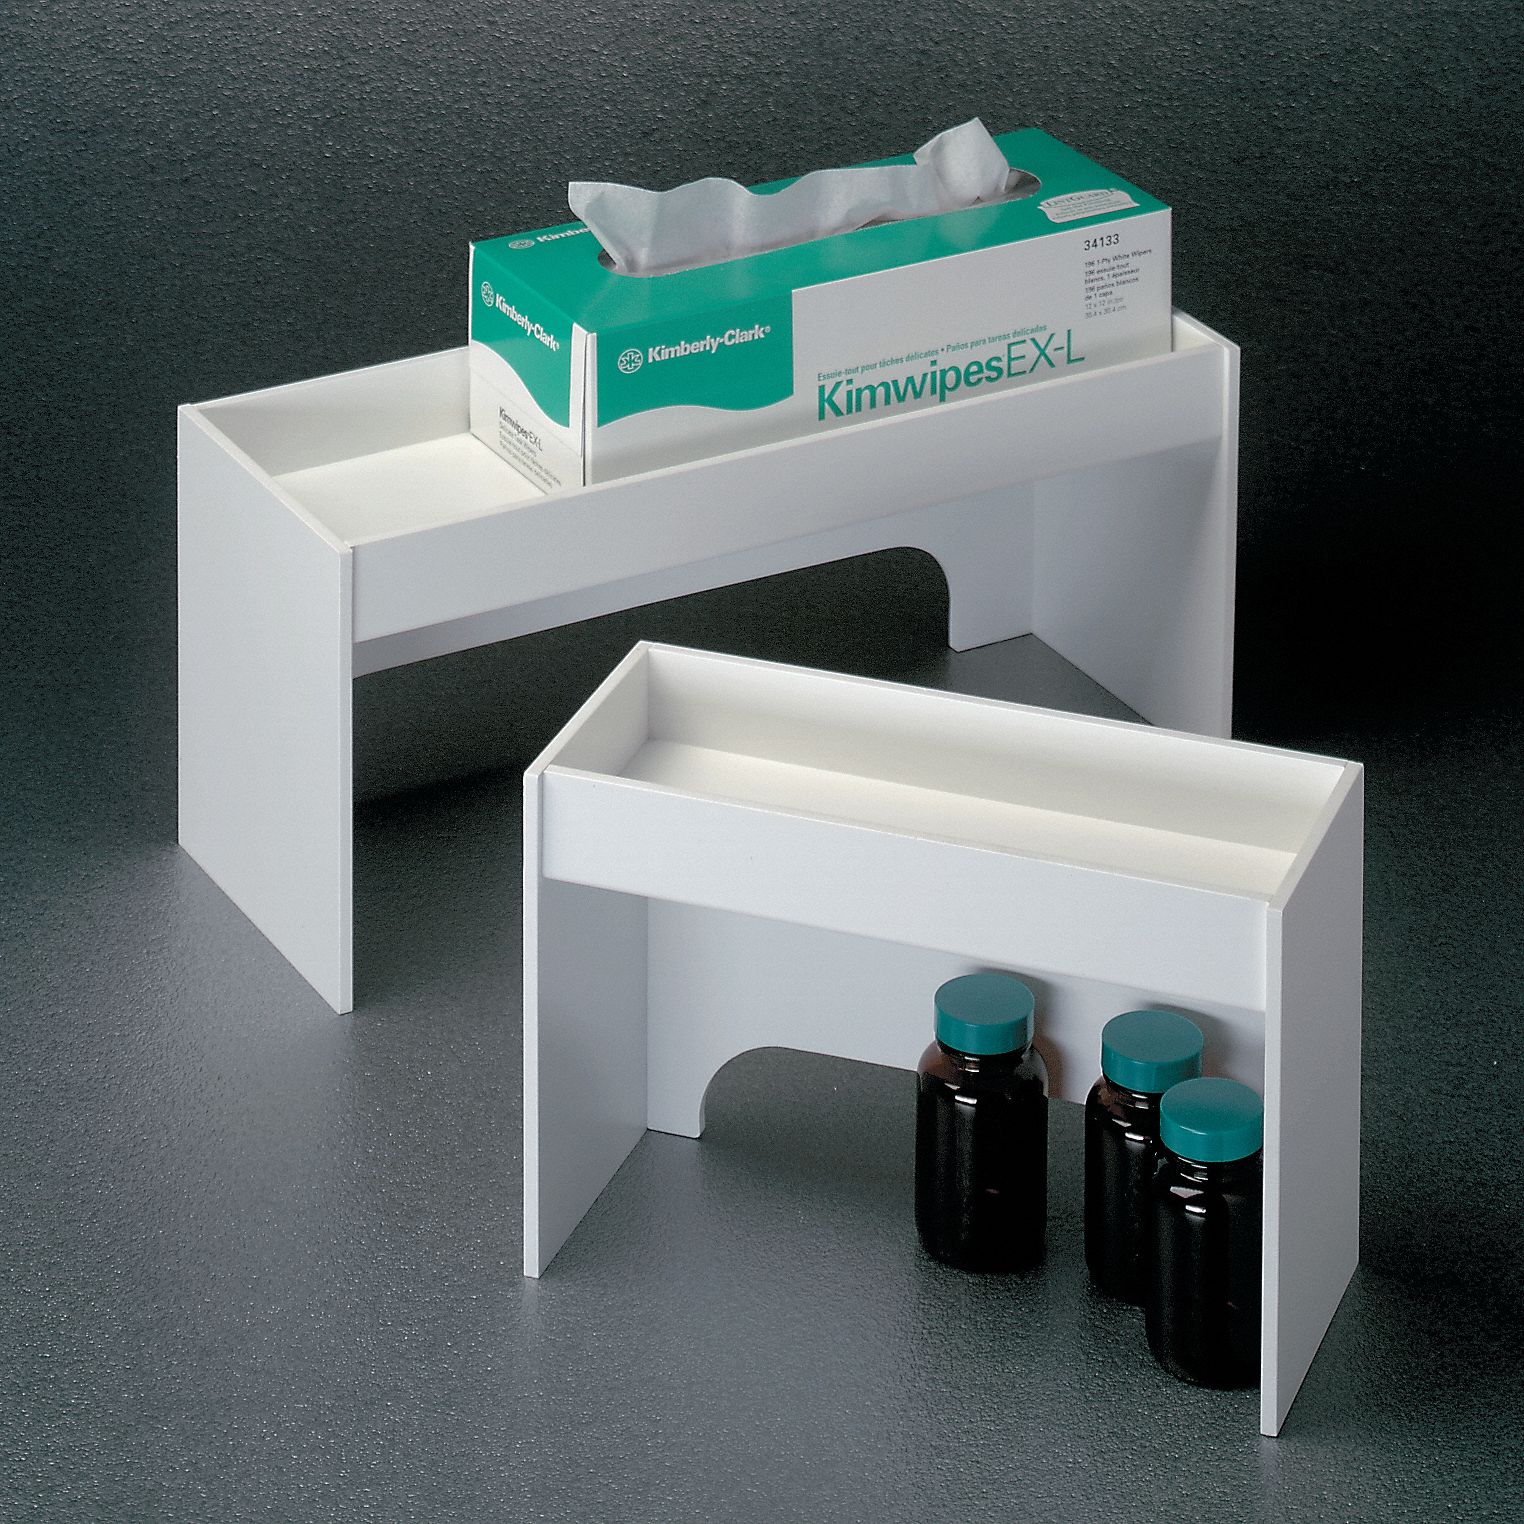 6-Compartment Organizer – Dynamic Labs